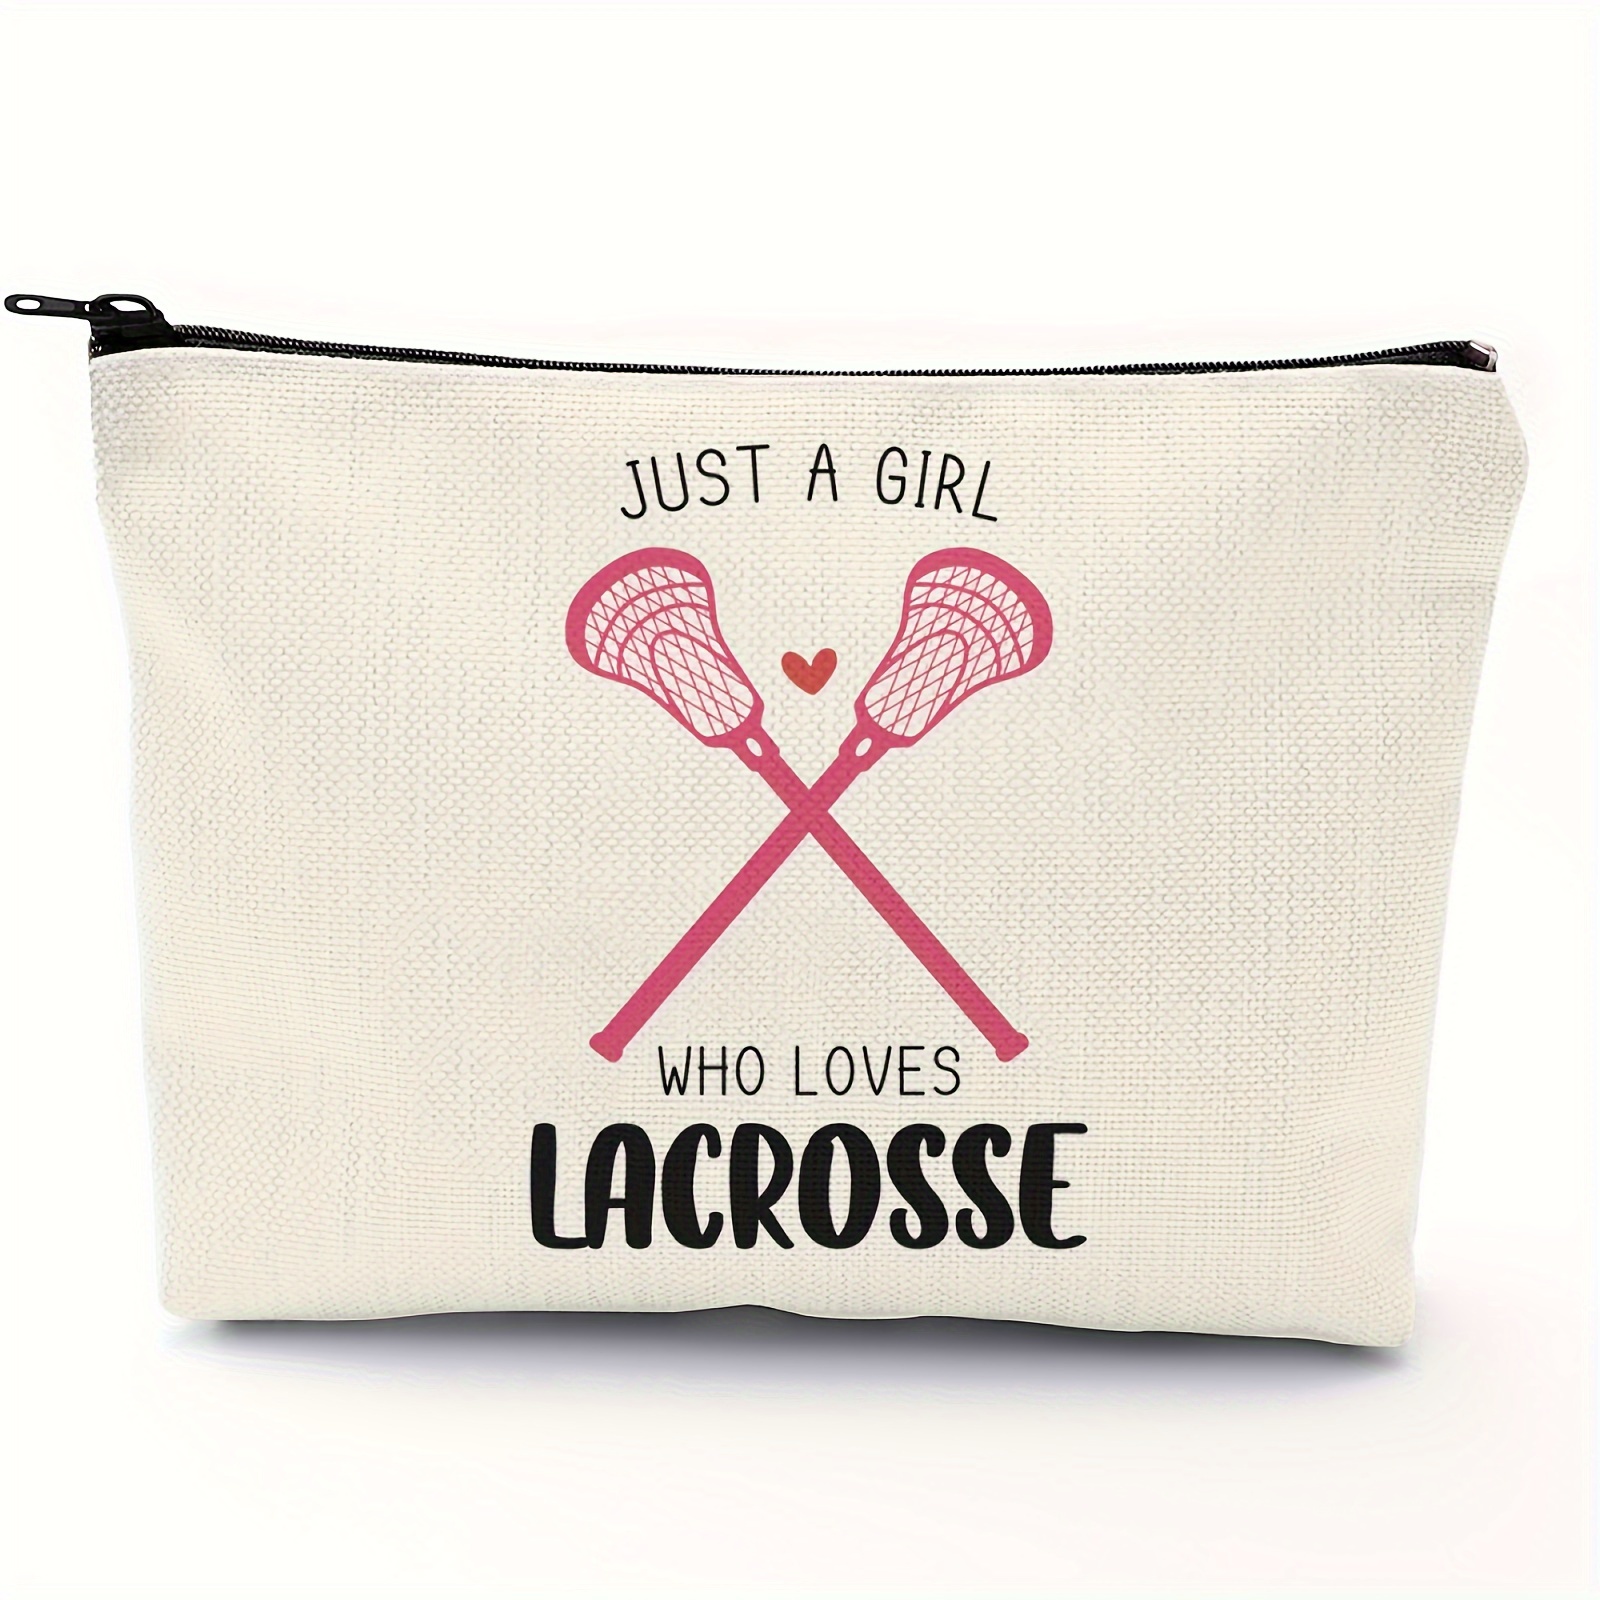 

Gifts For Makeup Bag Gifts For Moms Sports Players Team Birthday Gifts For Women- Just A Who Loves - Mother's Day Cosmetic Bag